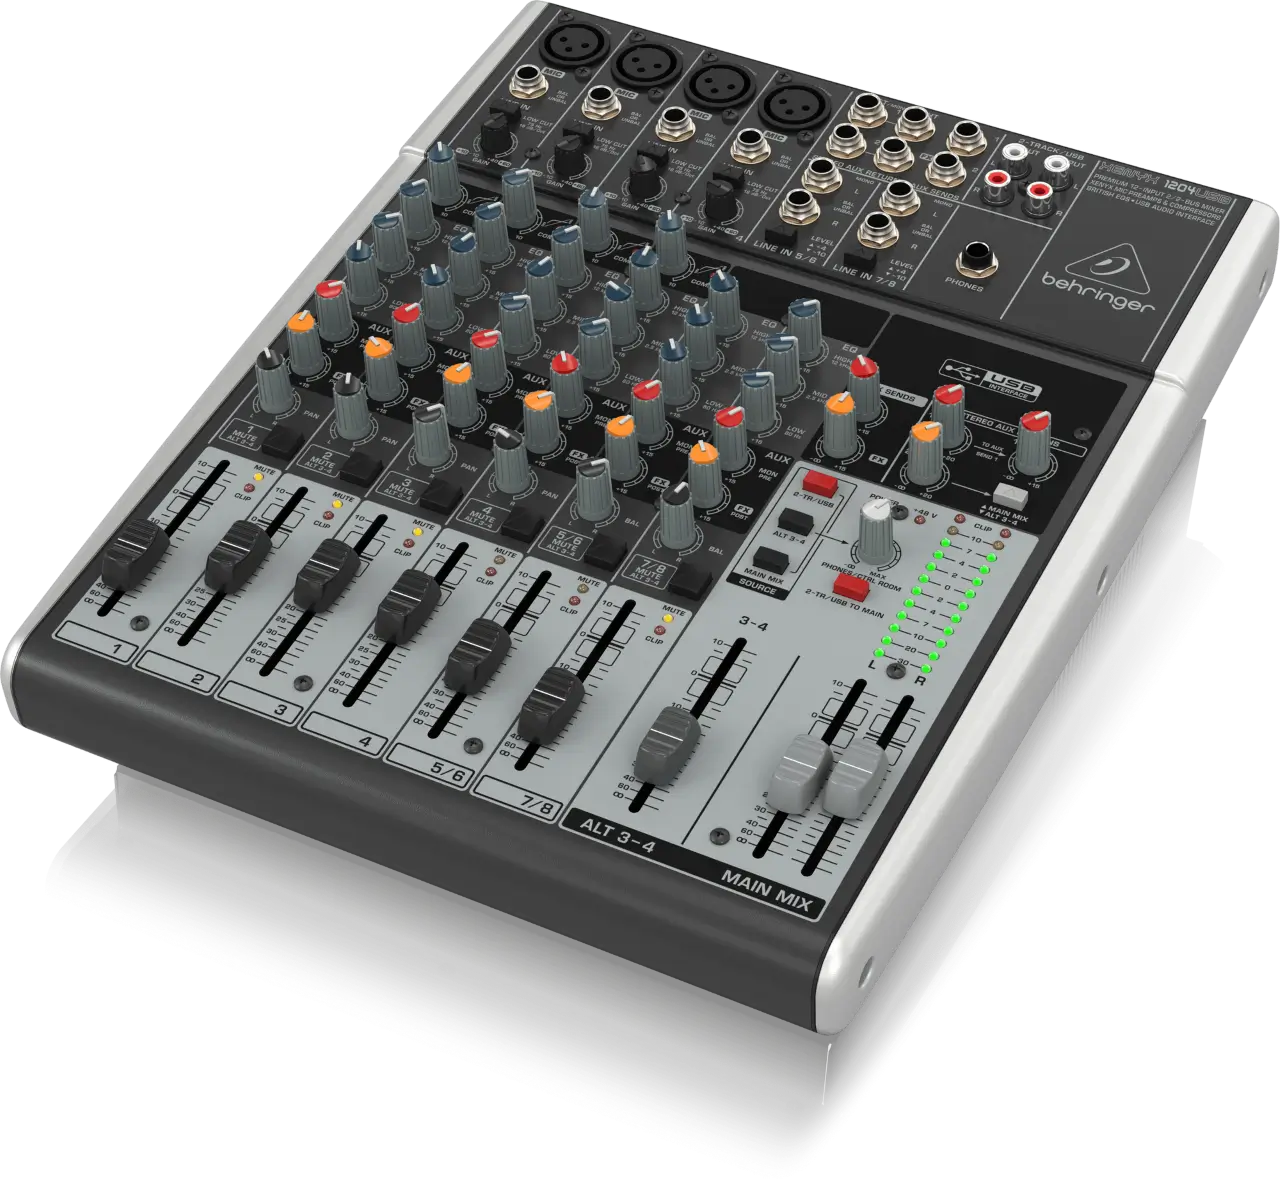 XENYX 1204USB/audio interface, a multi USB microphone mixer, allows for a direct connection to a computer, ensuring seamless recording.